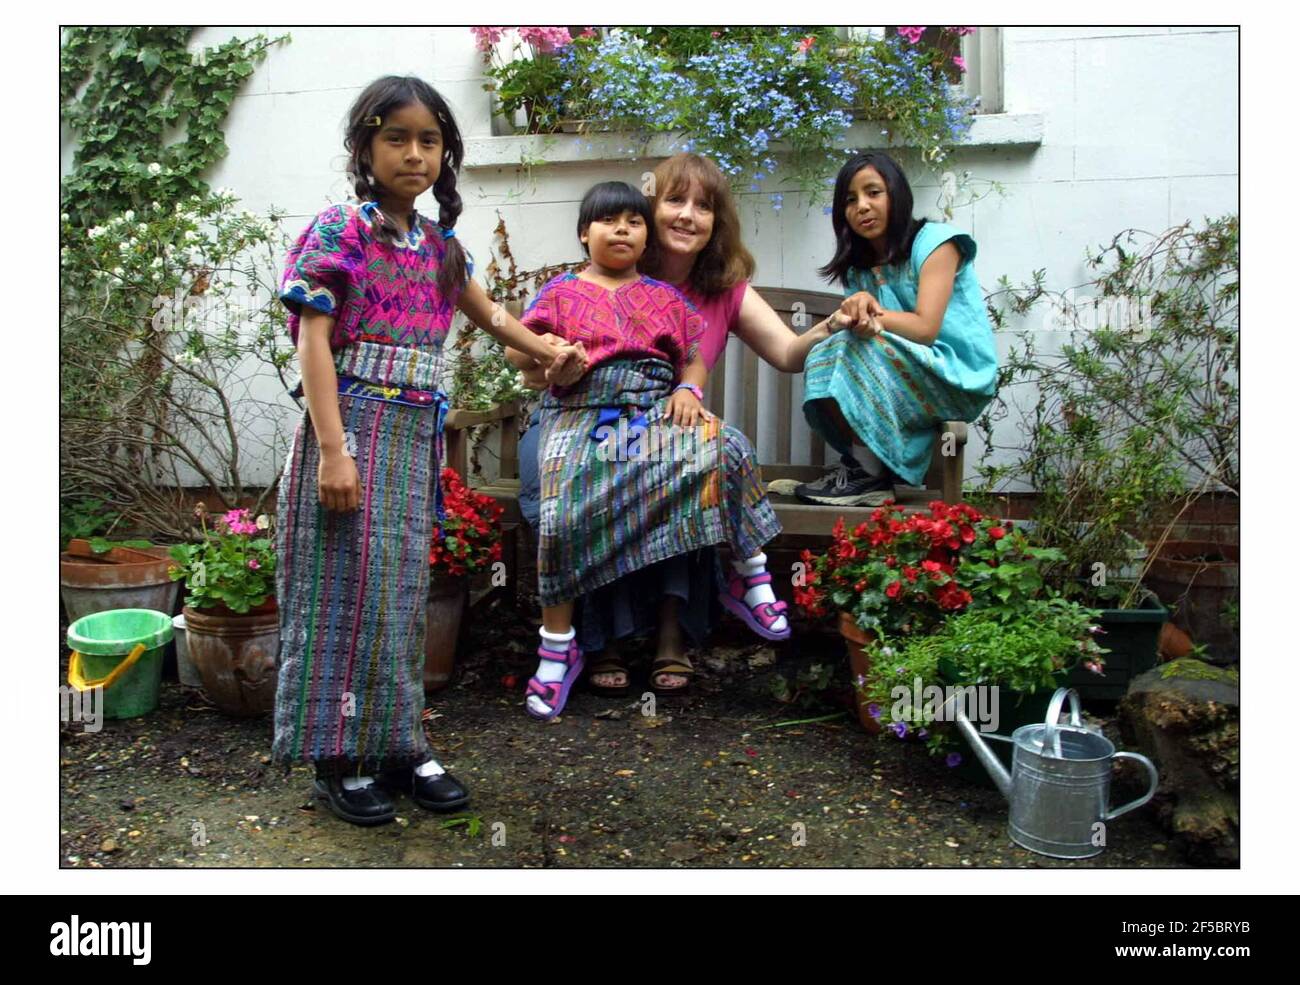 Catriona Aldridge with adopted daughters Sofia (7) shortest, Bella (8) pigtails and Itma (9) tallest.pic David Sandison 16/7/2003 Stock Photo